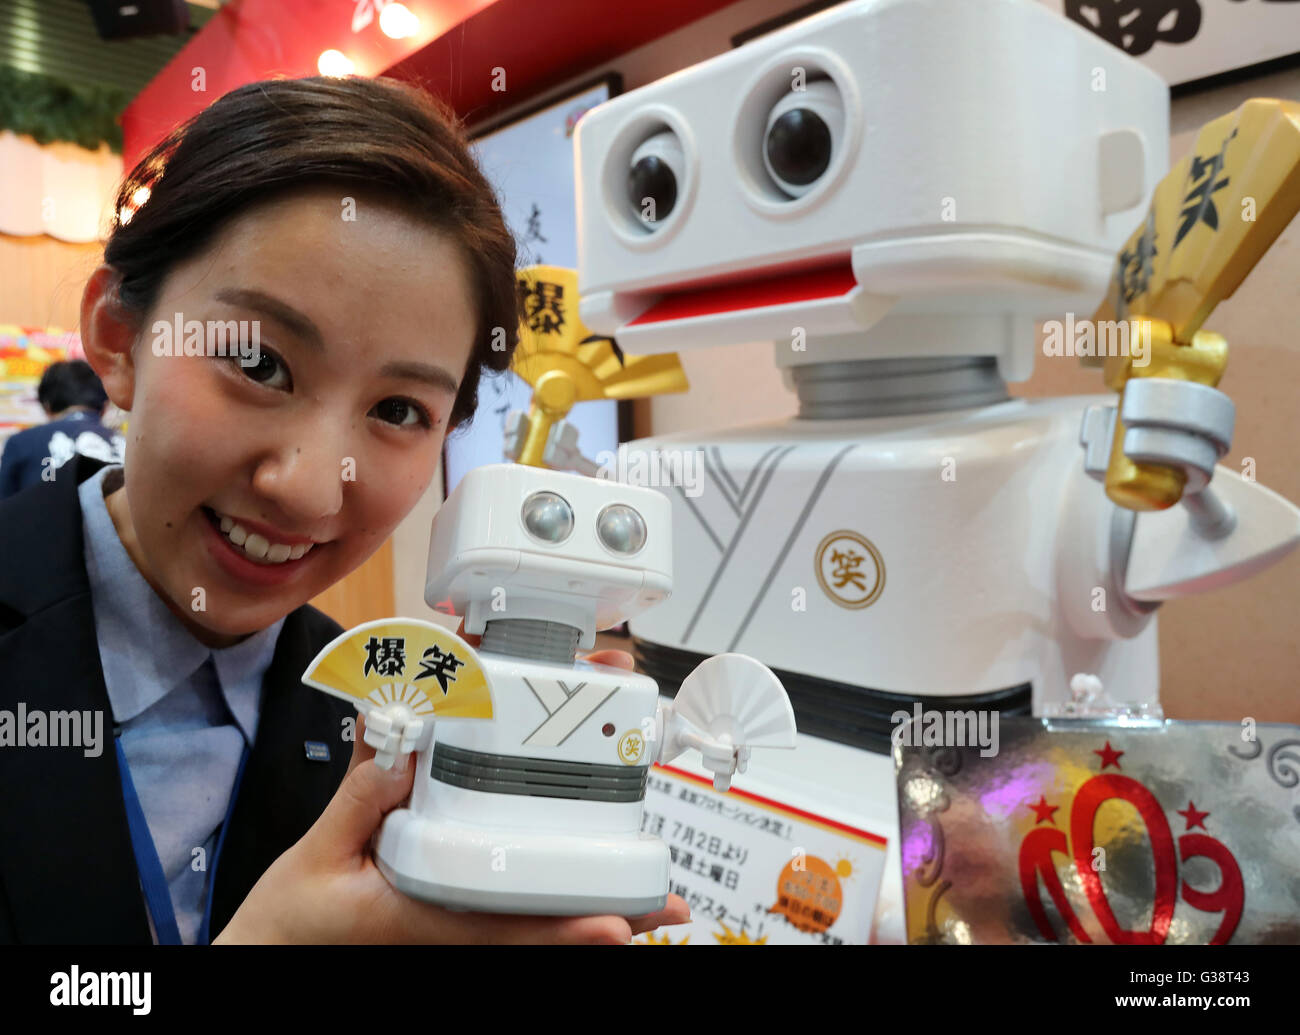 Tokyo, Japan. 9th June, 2016. An employee of Japanese toy maker Tomy displays a toy robot 'Baku Shotaro' which can toss off a total of 1,300 gags at the annual Tokyo Toy Show in Tokyo on Thursday, June 9, 2016. Some 160,000 people are expecting to visit the four-day toy trade show. © Yoshio Tsunoda/AFLO/Alamy Live News Stock Photo